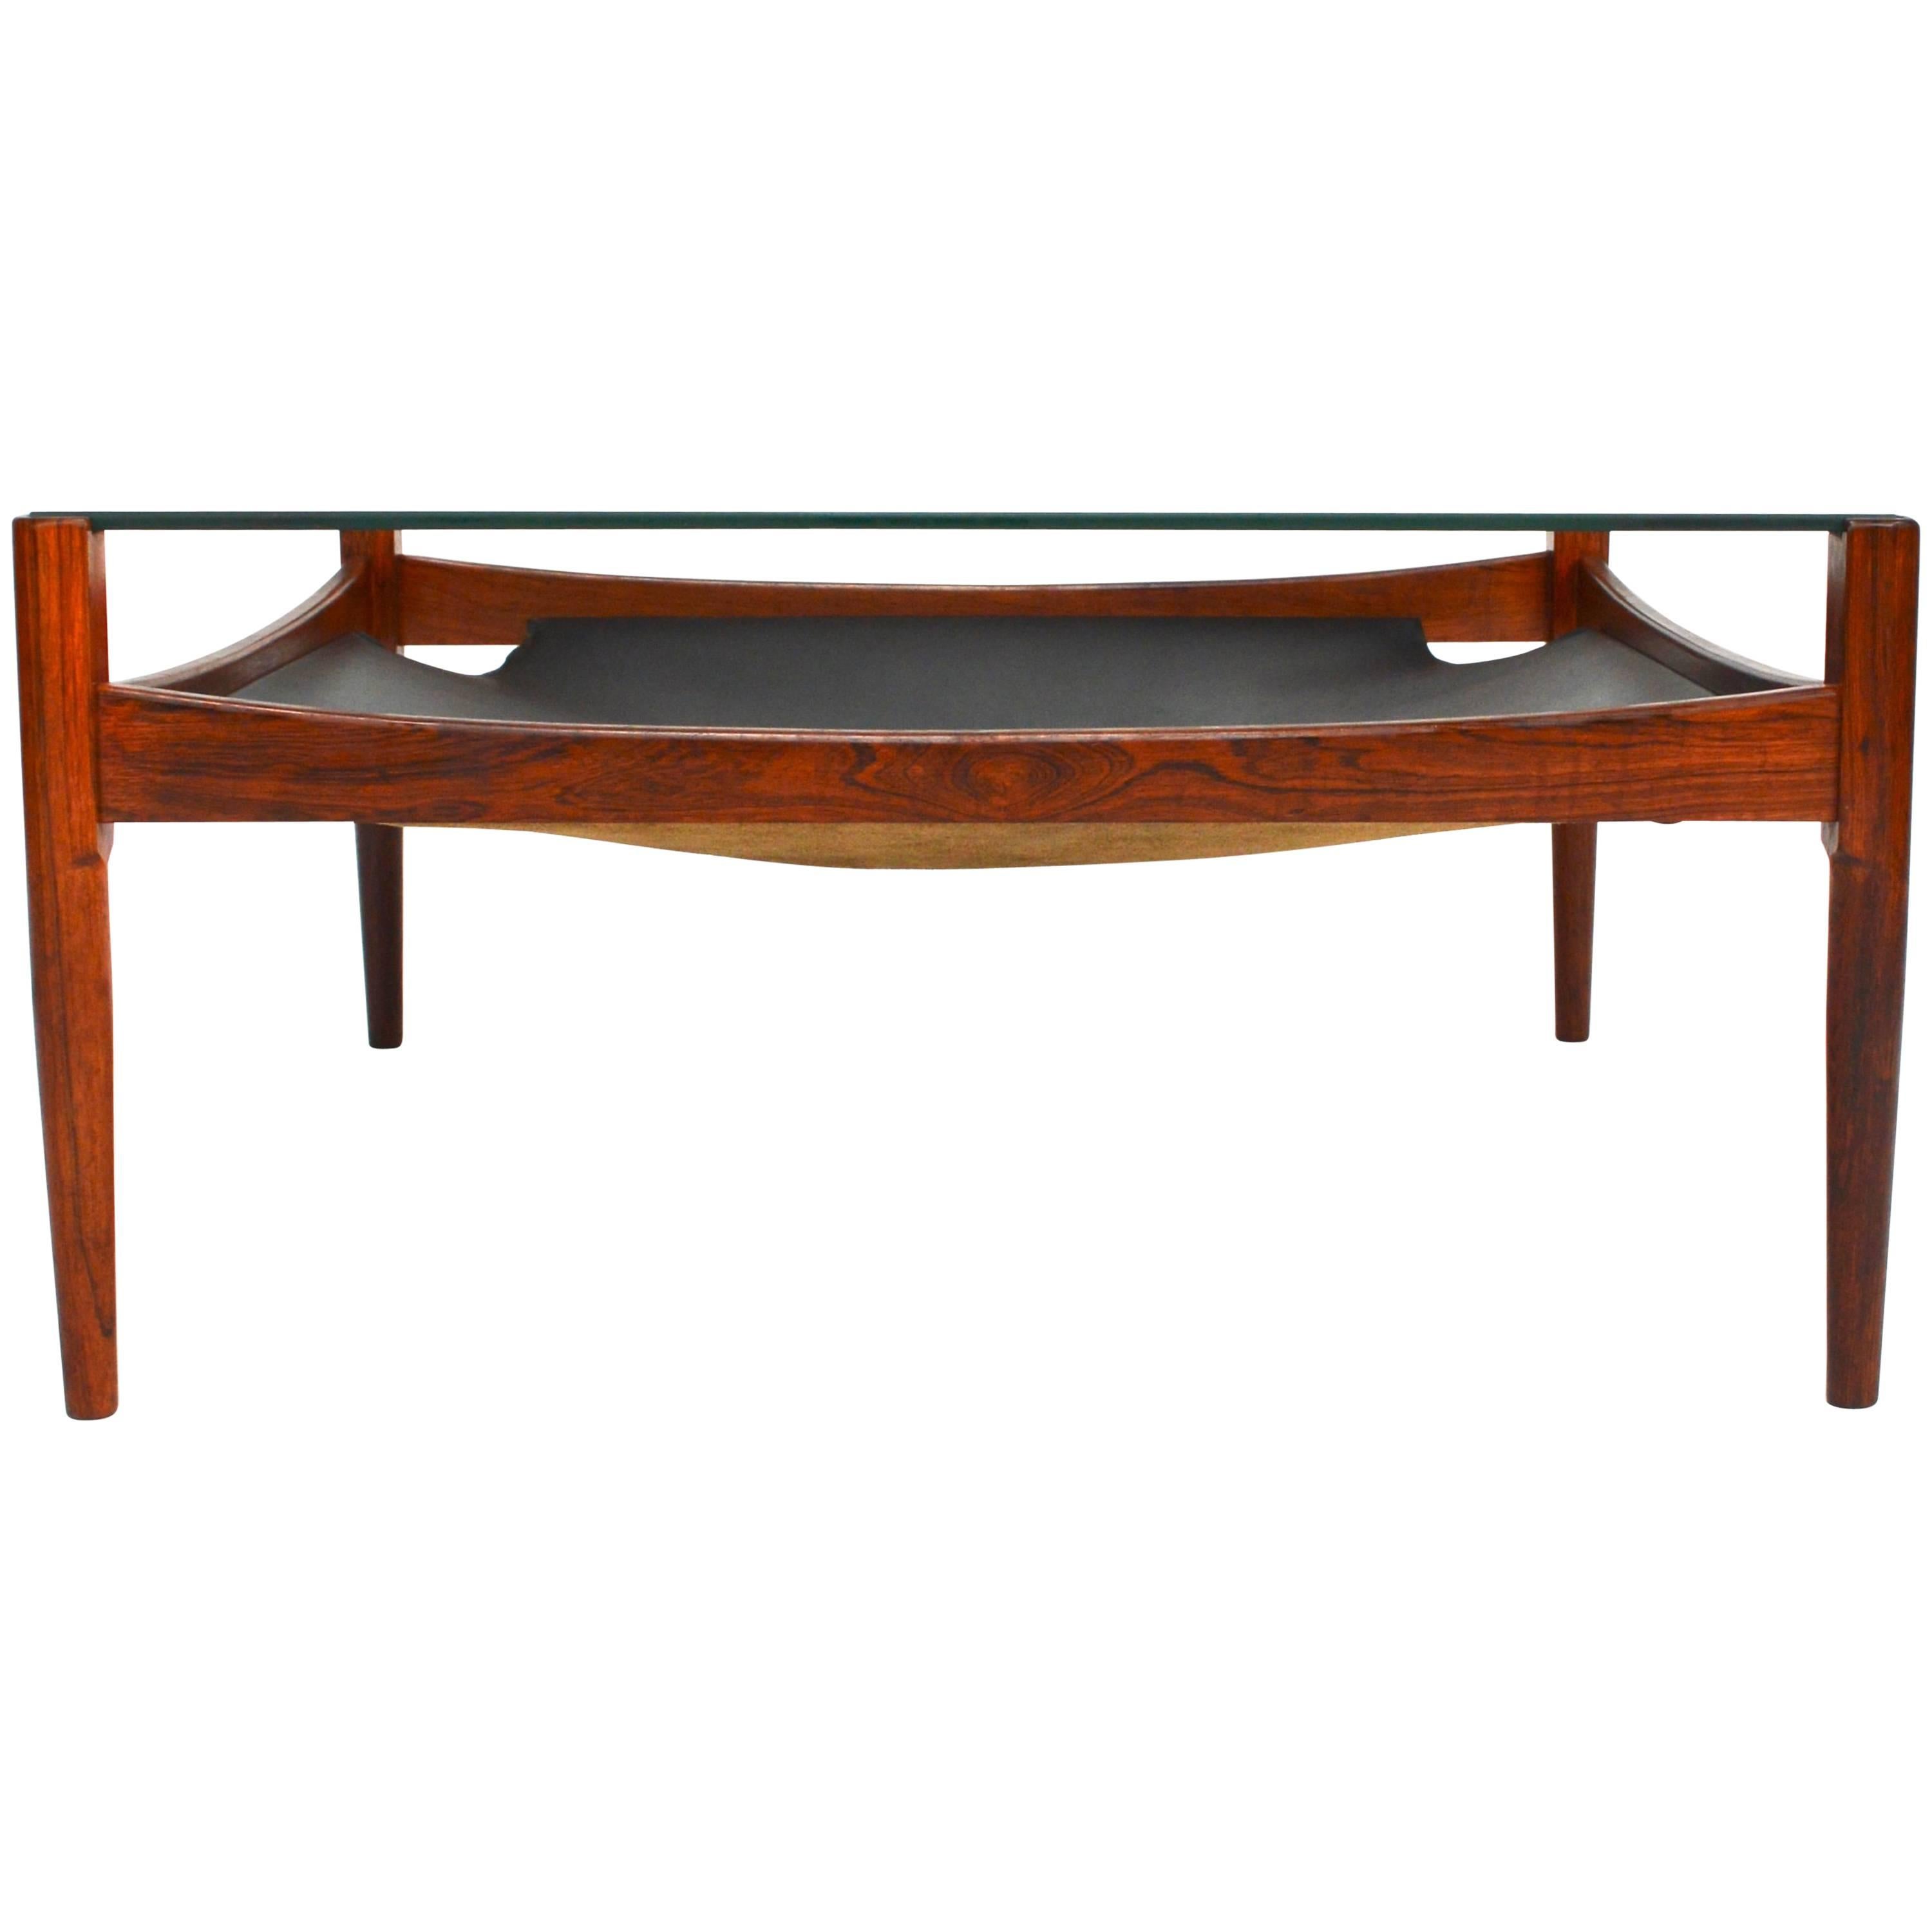 Kristian Vedel Leather and Brazilian Rosewood Coffee Table